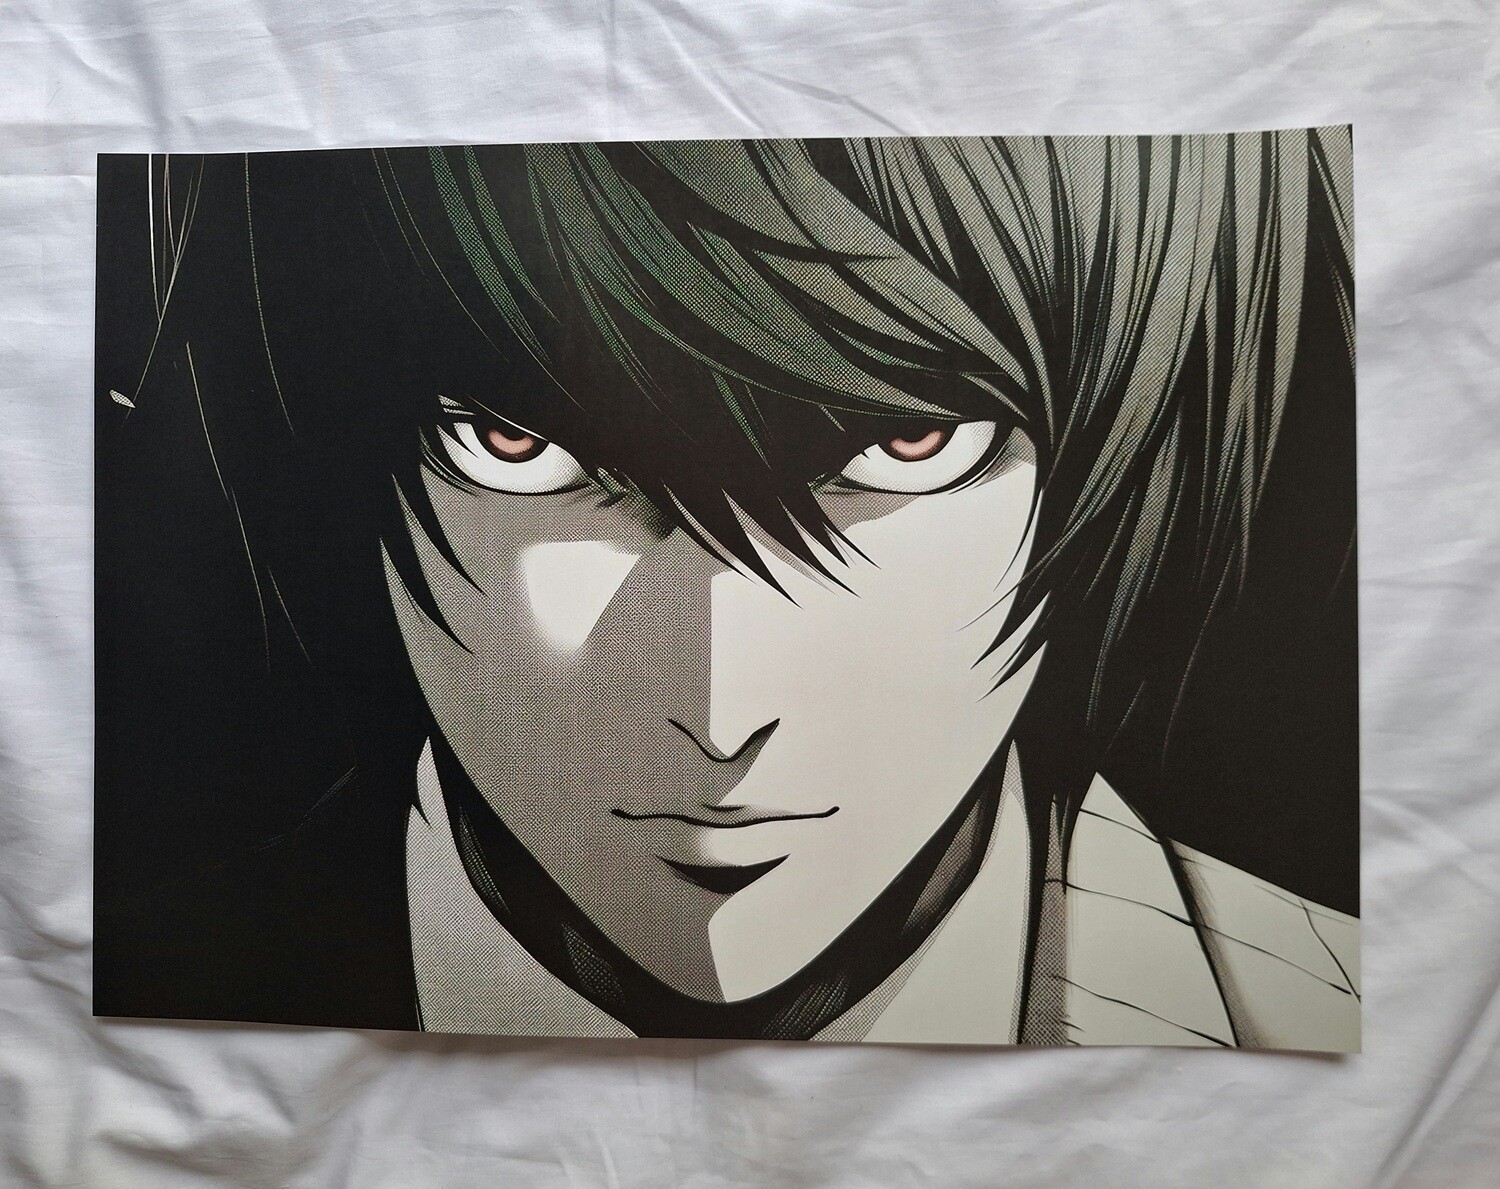 Death Note
A3 Poster.